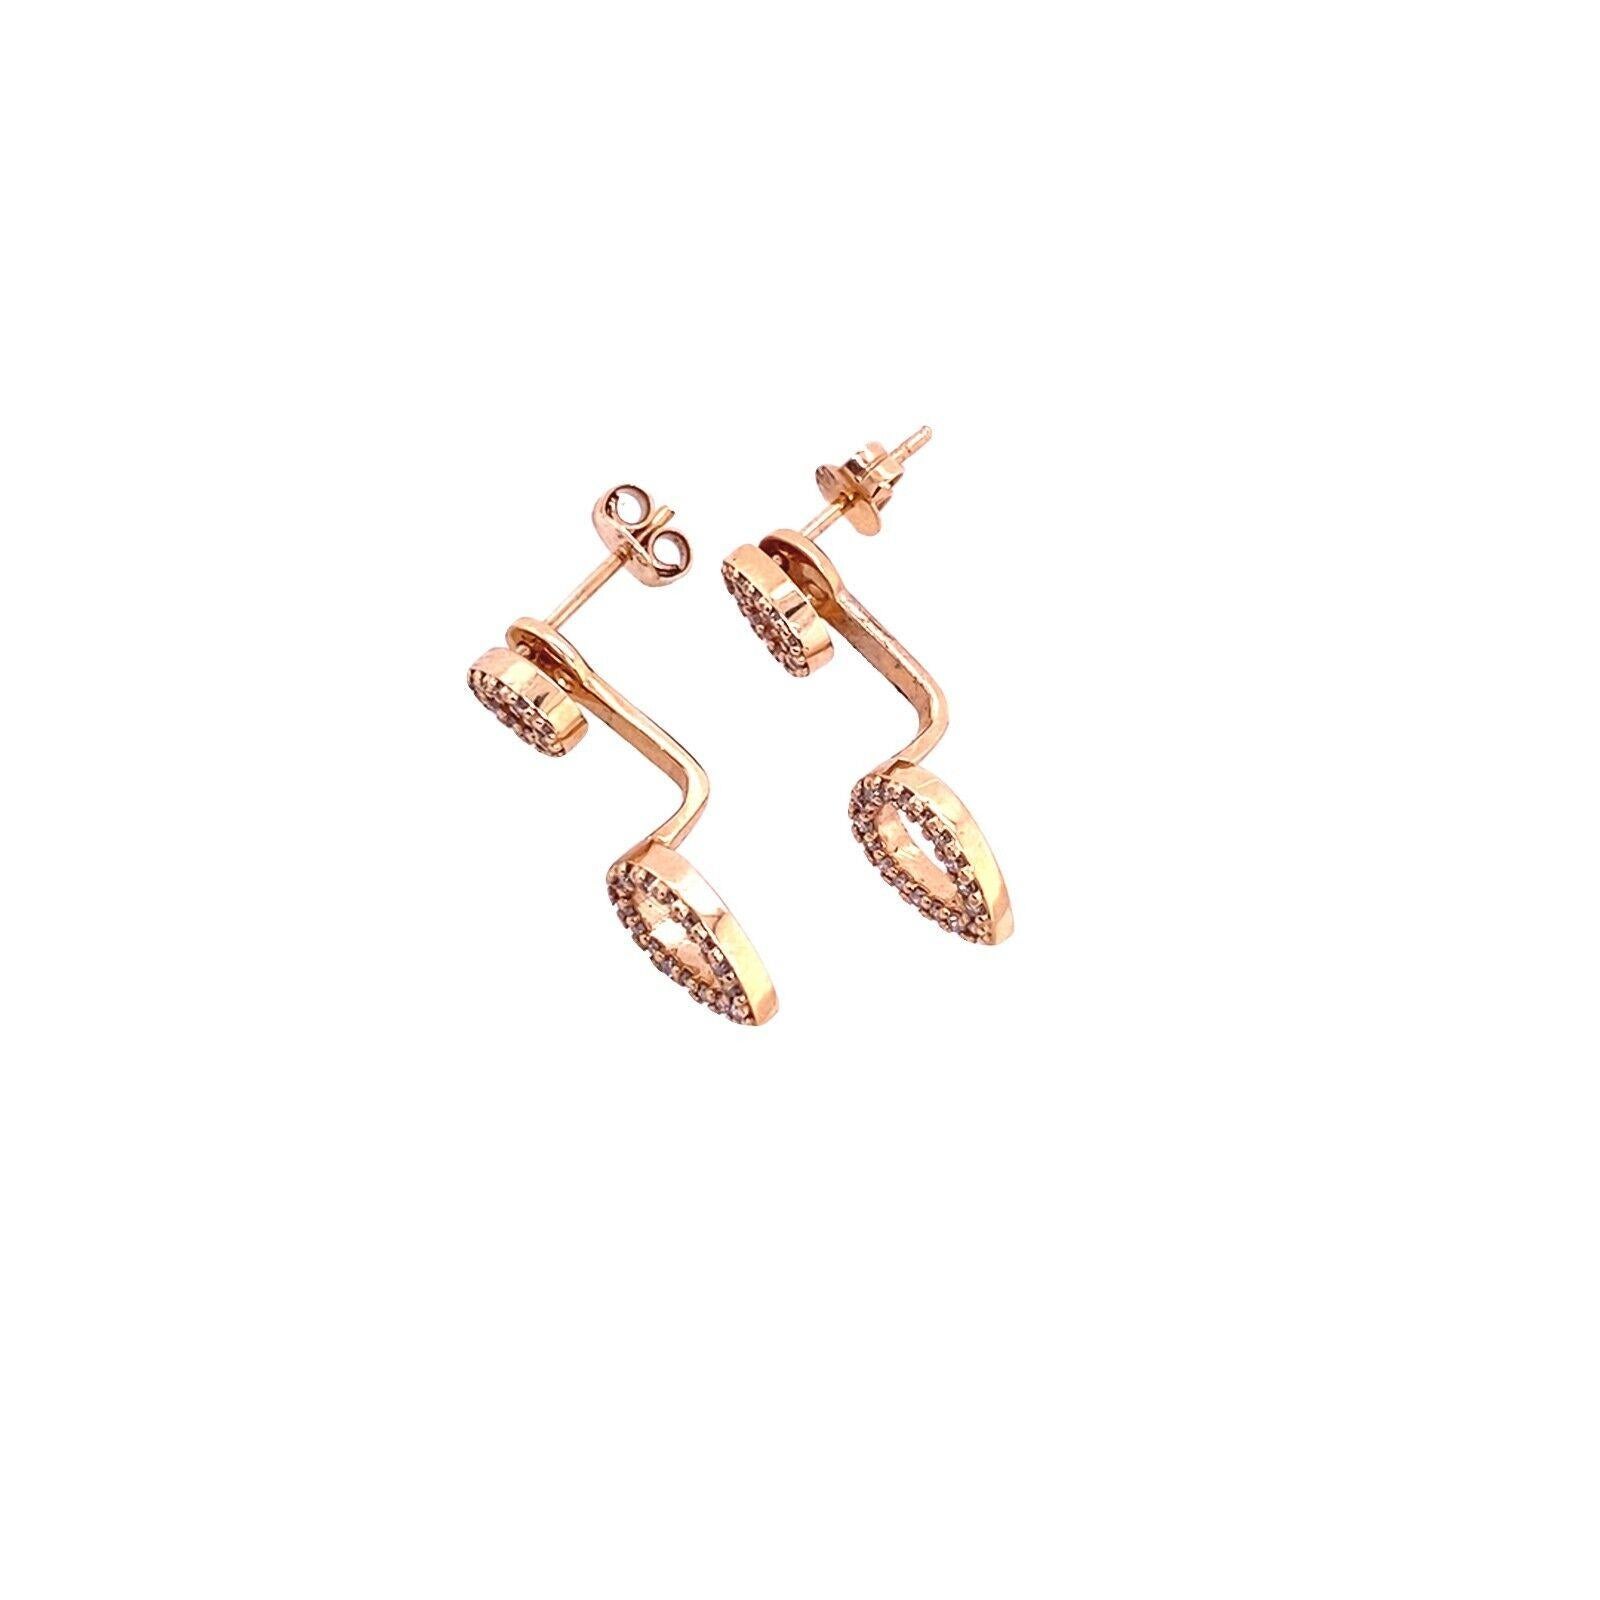 New Fine Quality Drops & Studs Earrings Set with Diamonds in 18ct Rose Gold

These are the perfect pair of earrings to complete your look. This pair of earrings features a gorgeous drop design that is complimented by a small stud on the back. The